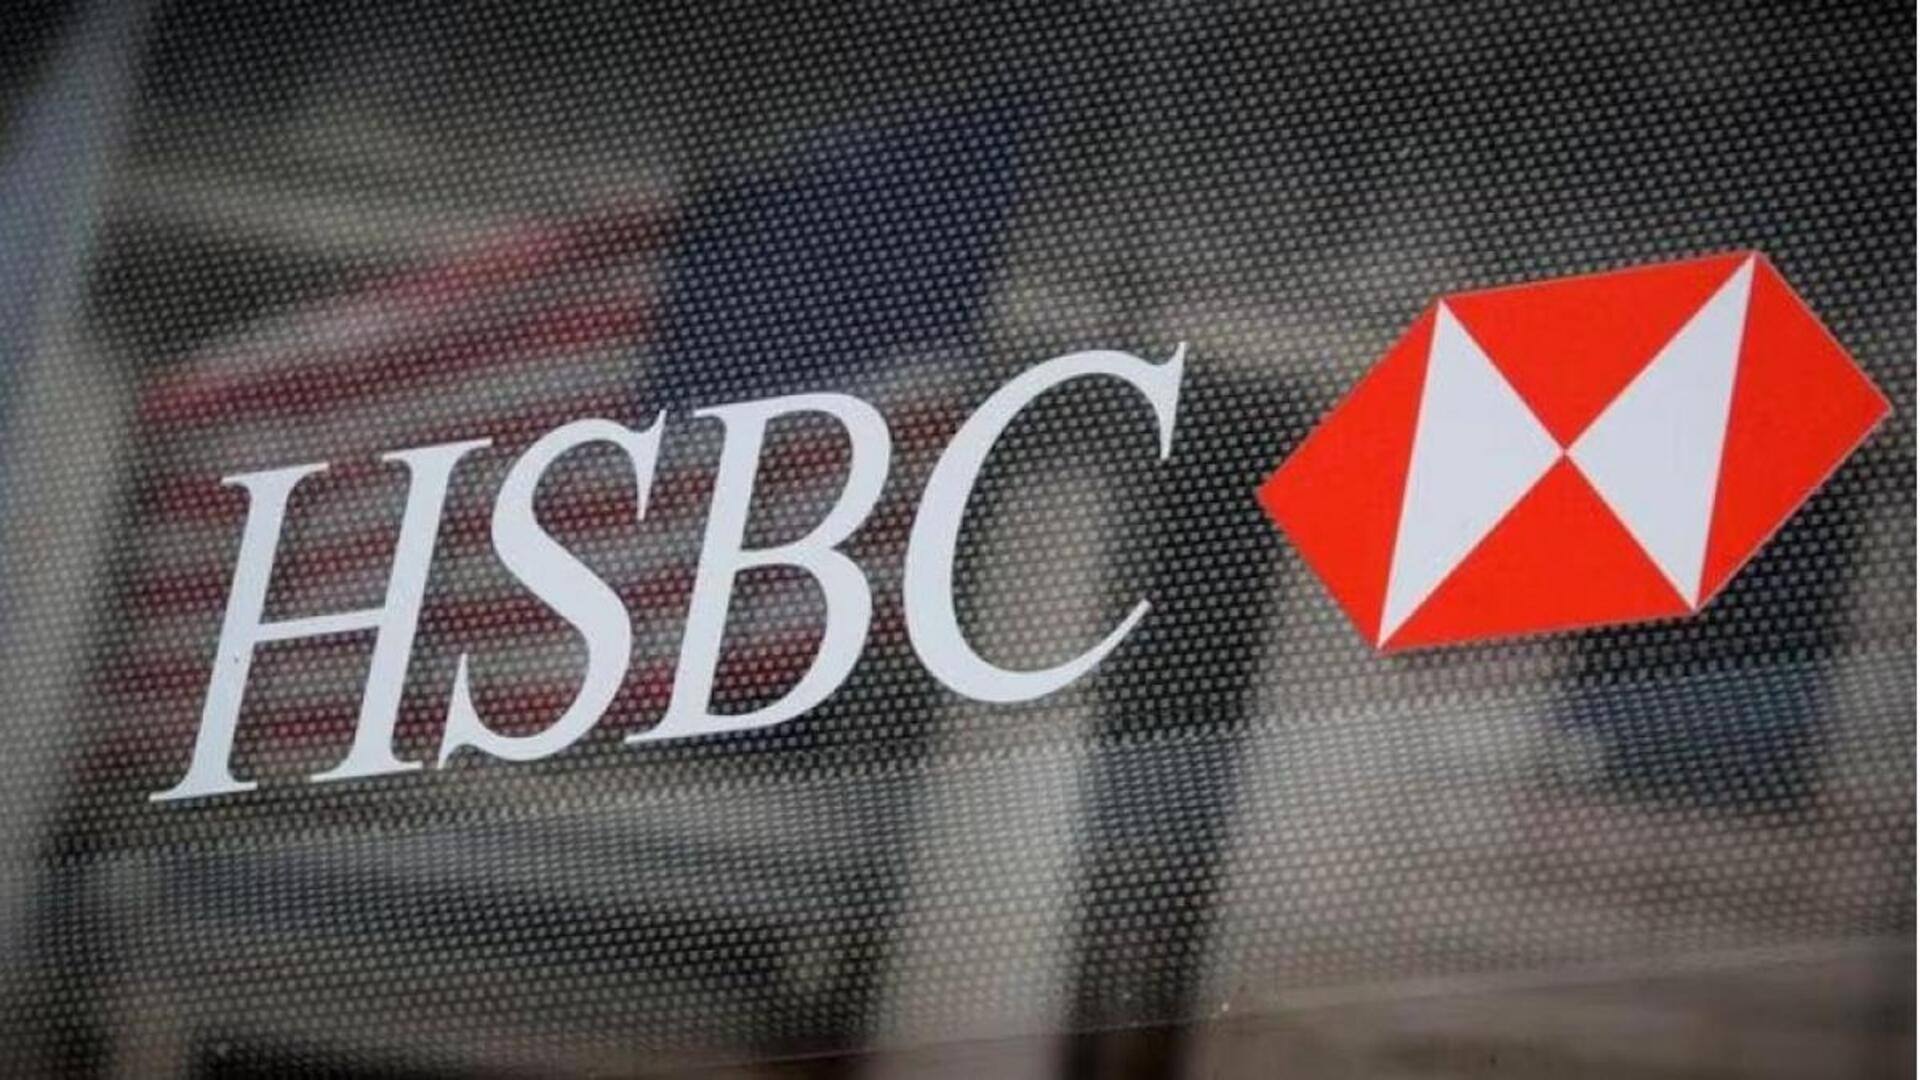 HSBC buys Citigroup's China wealth management business for $3.6 billion